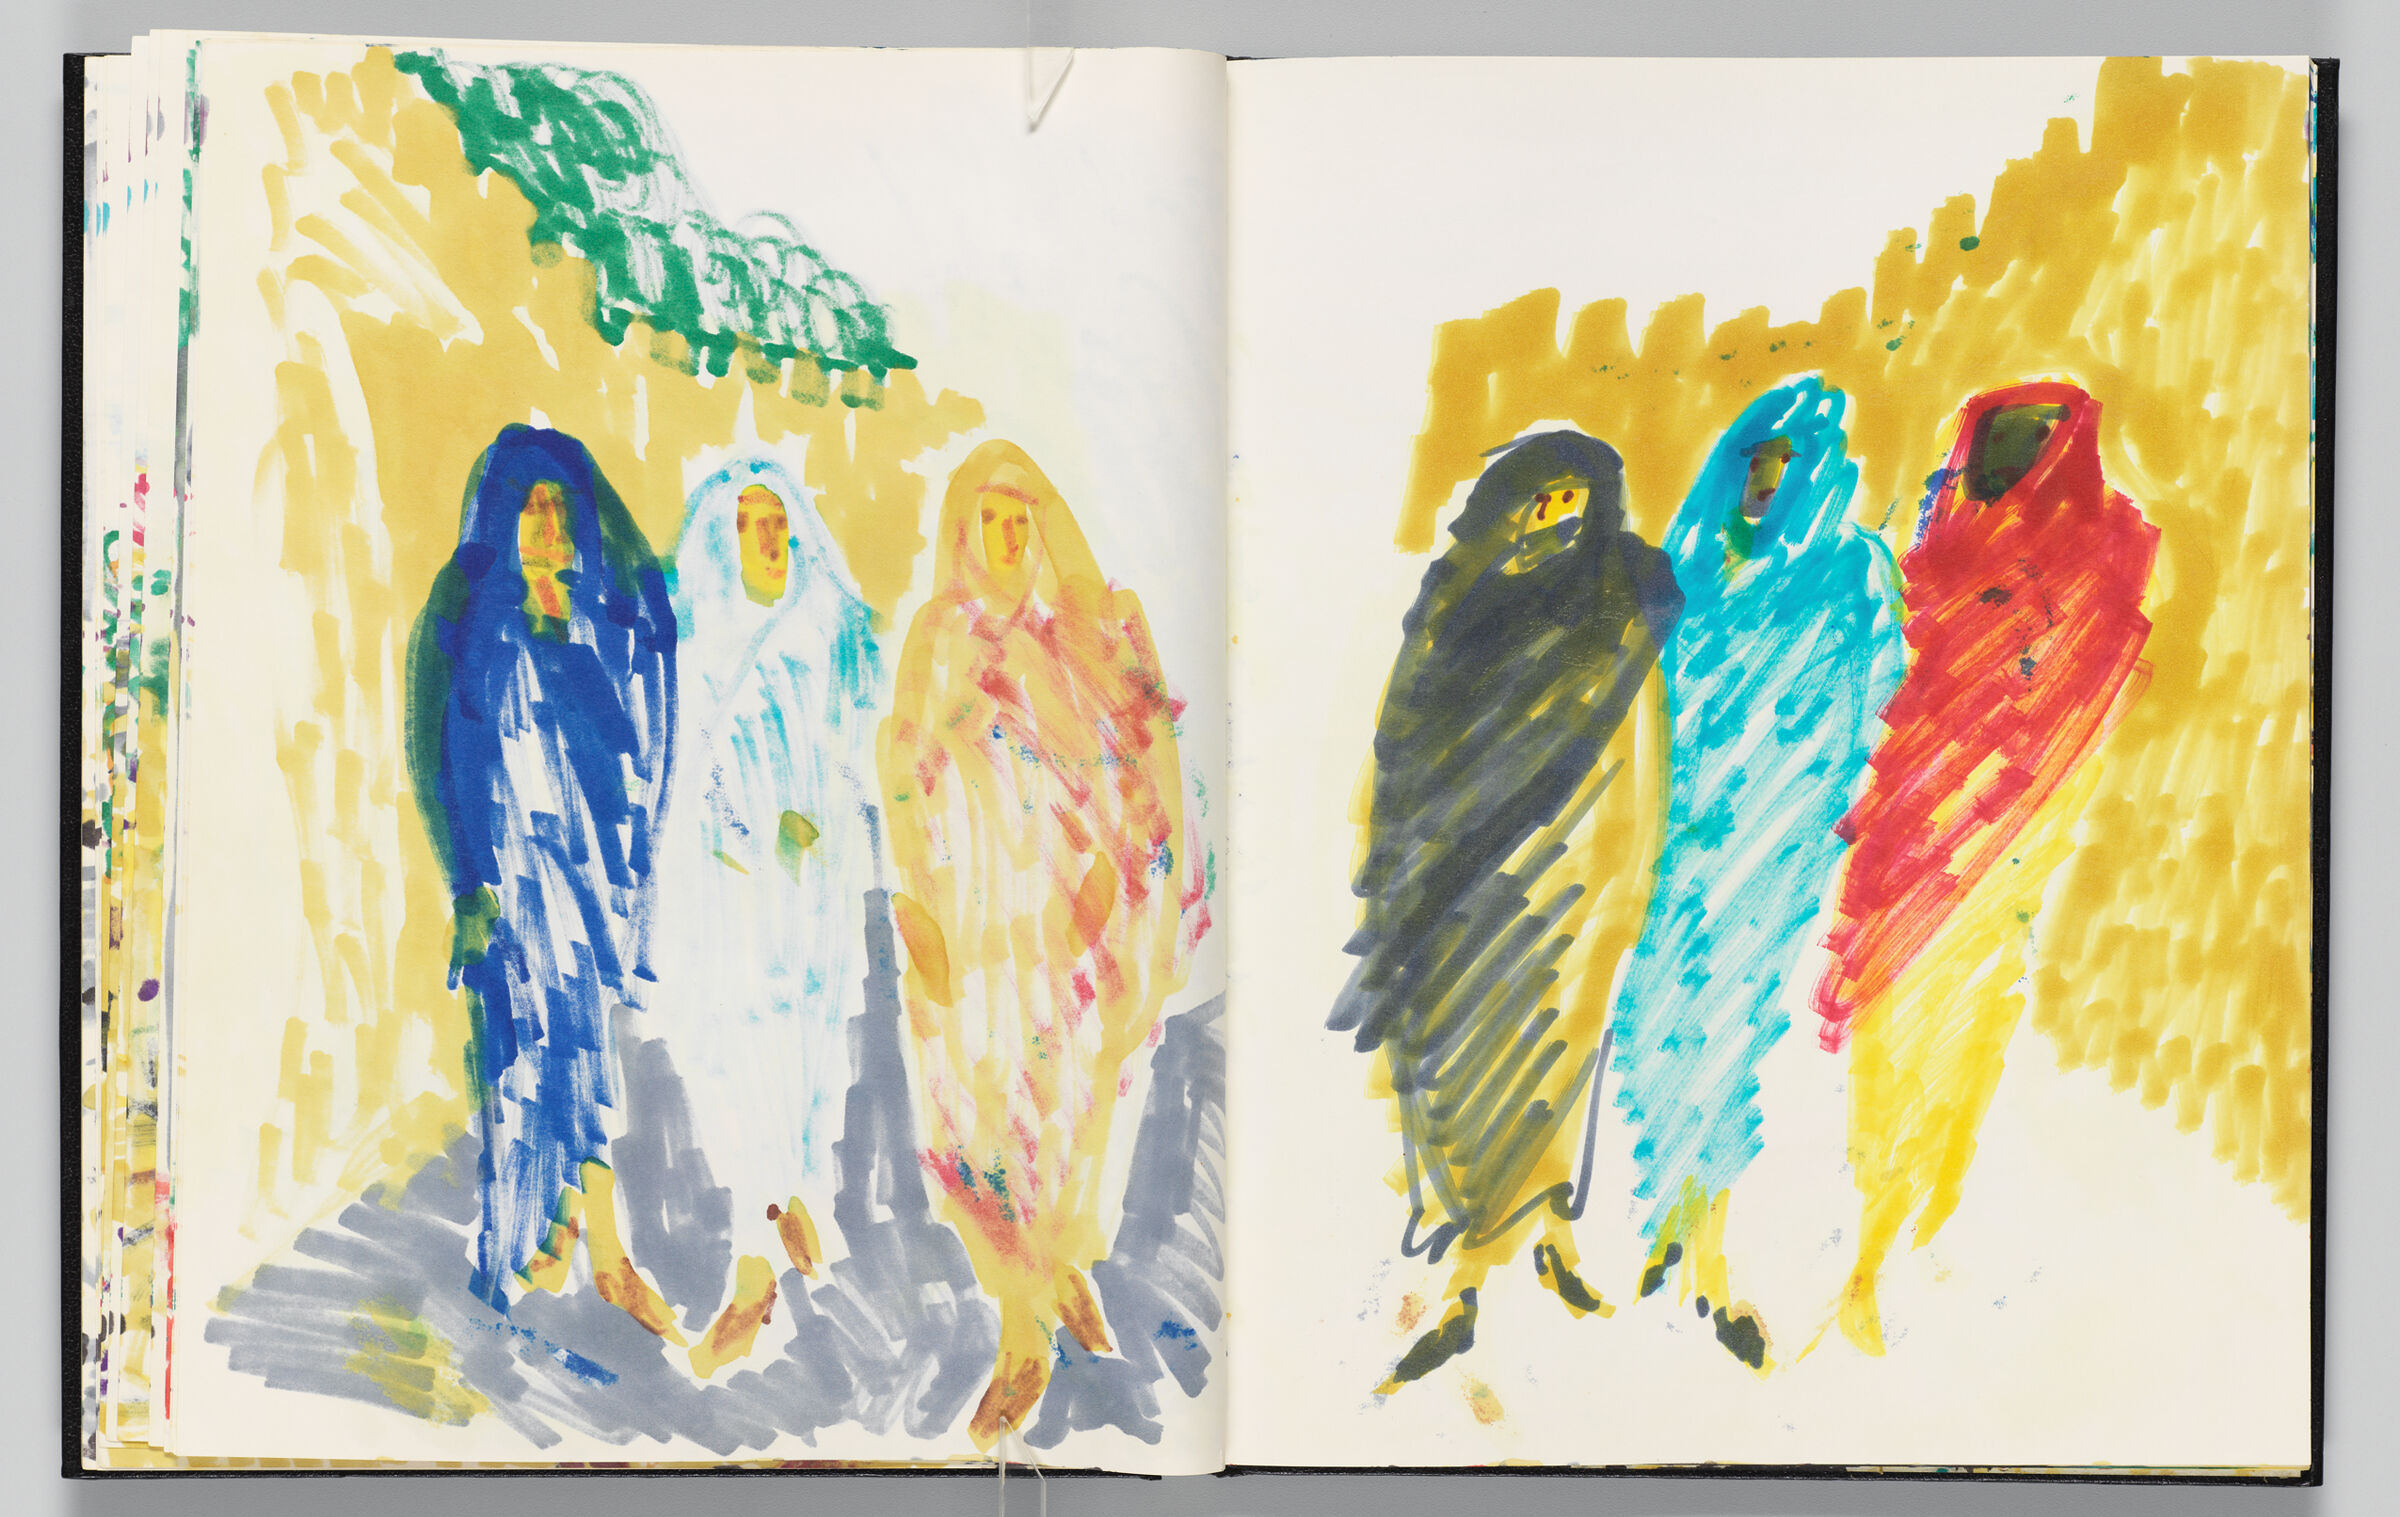 Untitled (Bleed-Through Of Previous Page, Left Page); Untitled (Three Figures, Right Page)